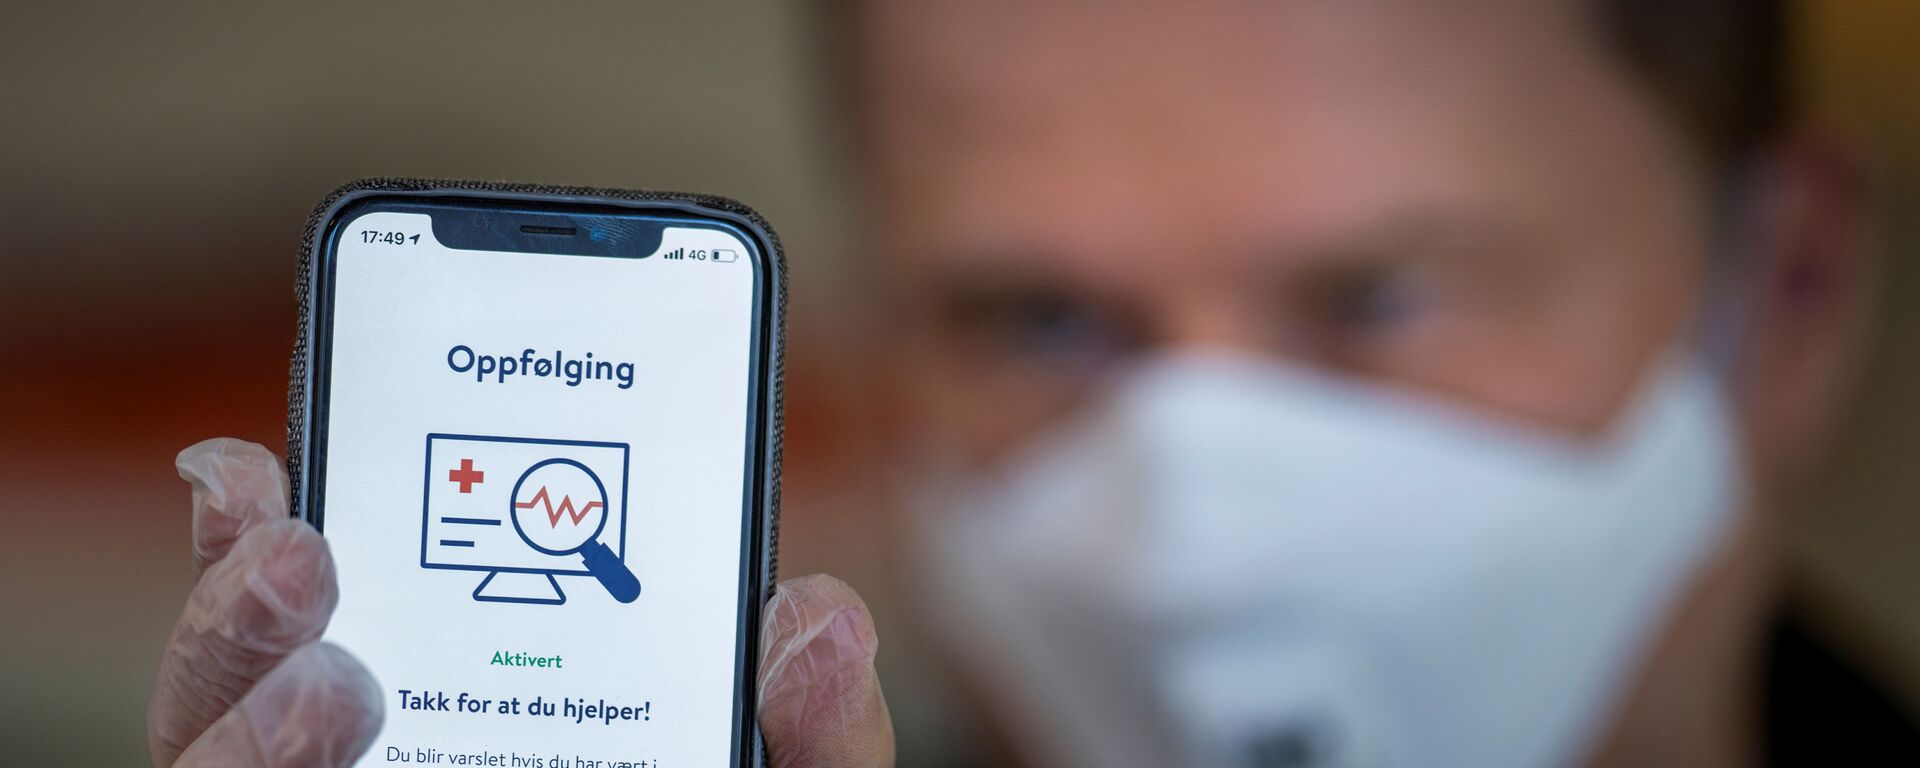 FILE PHOTO: The National Institute of Public Health's new app Smittestopp (Infection Stop) for infection tracking is pictured, in Oslo, Norway April 16, 2020. Picture taken April 16, 2020 - Sputnik International, 1920, 16.12.2021